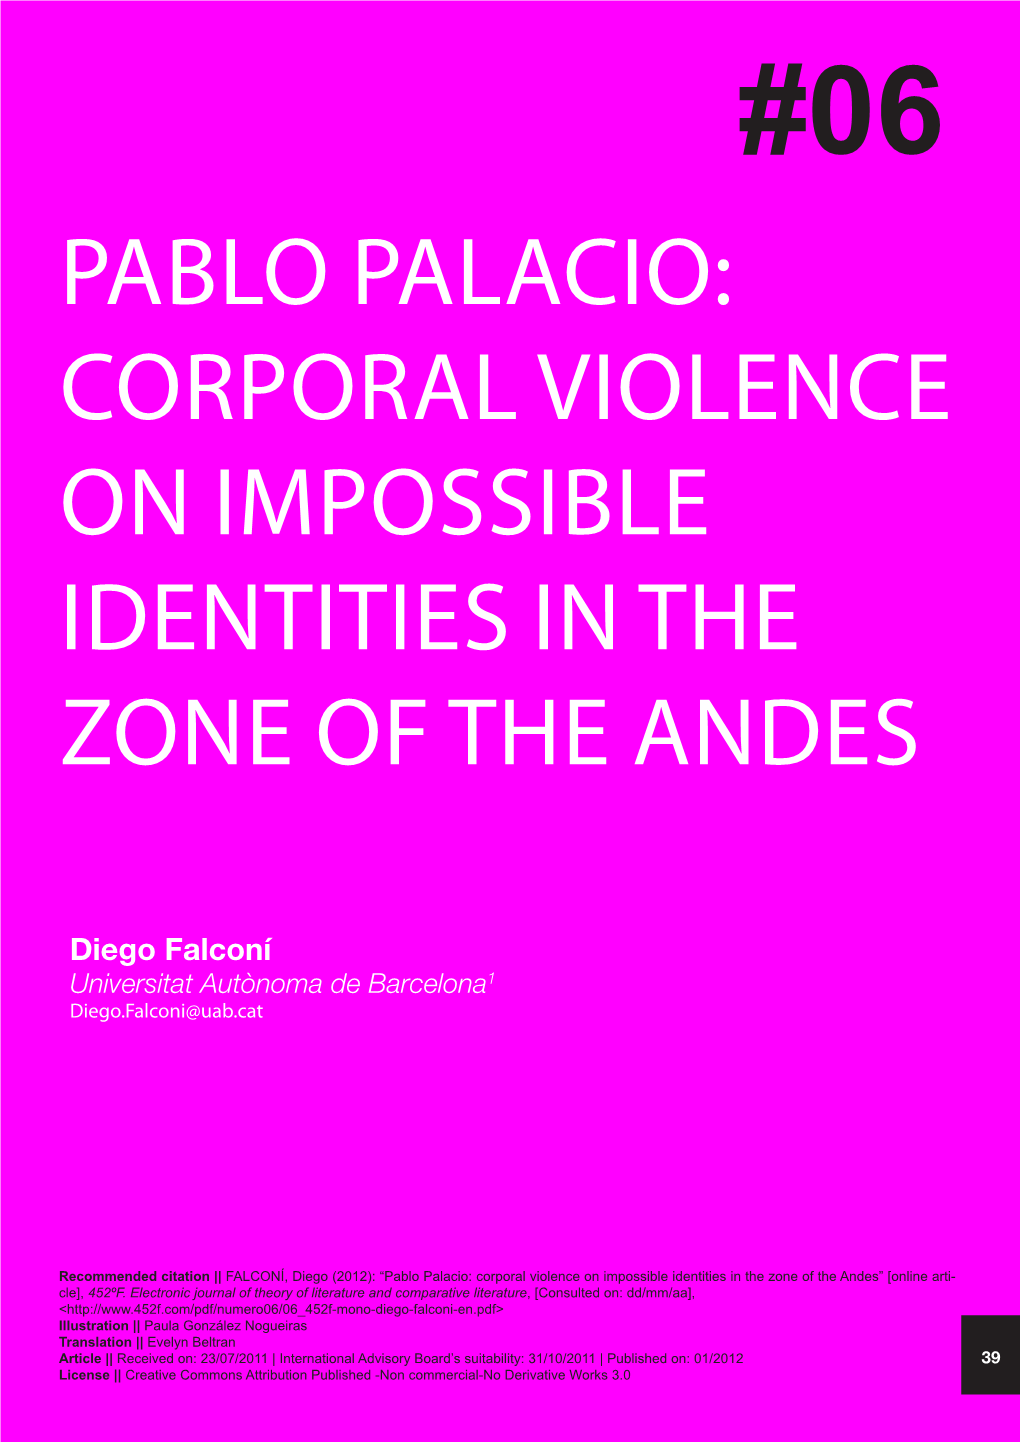 Pablo Palacio: Corporal Violence on Impossible Identities in the Zone of the Andes